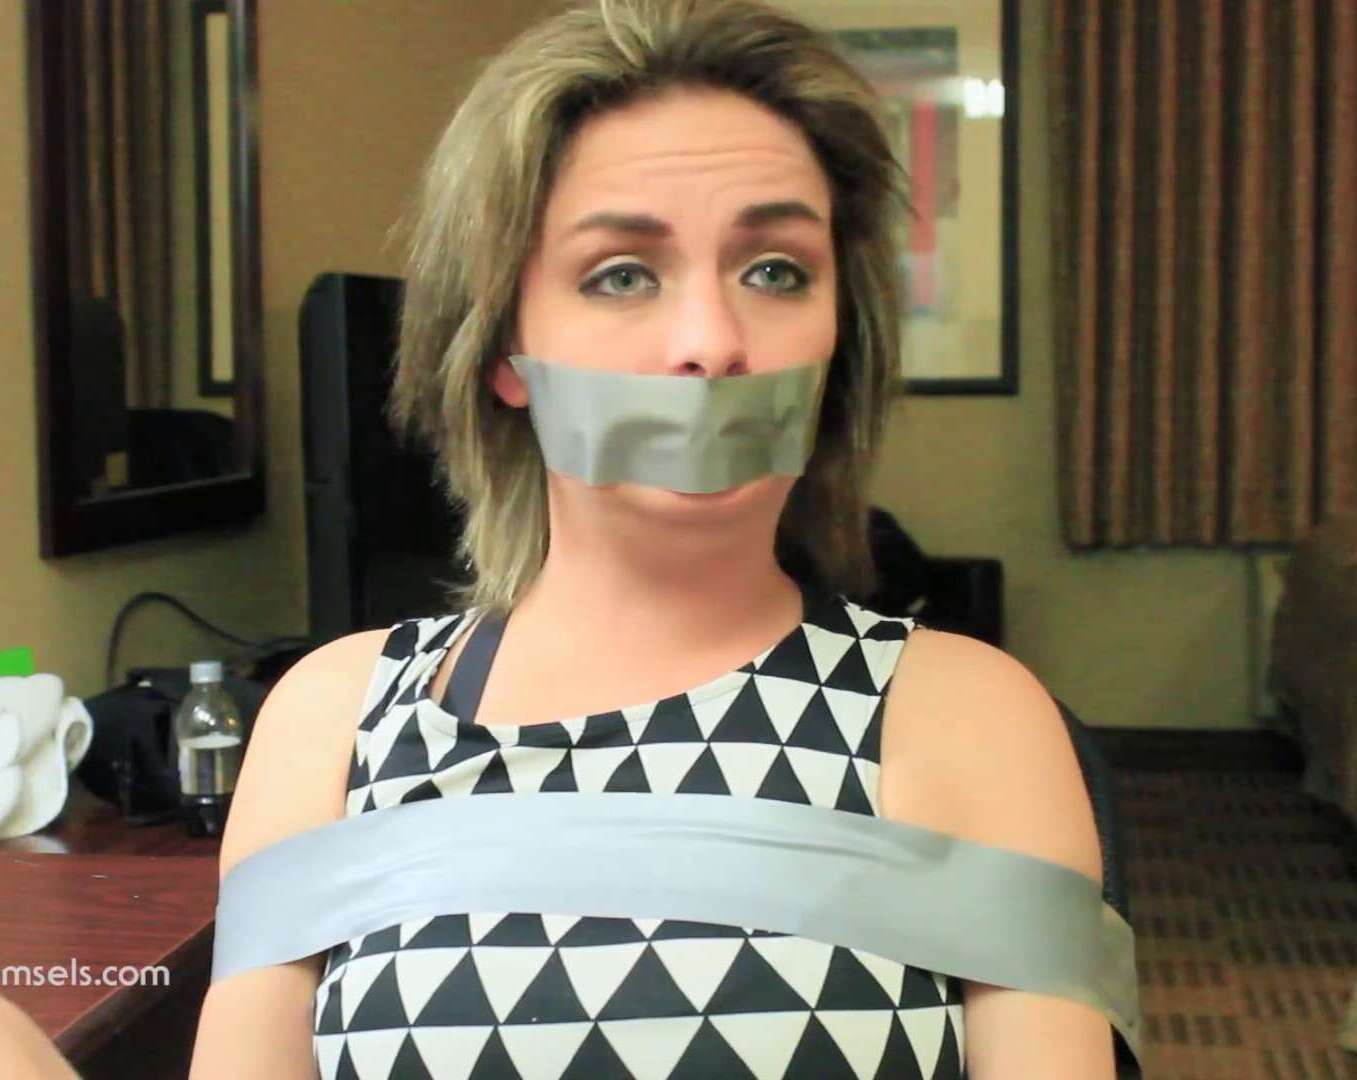 Ashlee Graham is cleave gagged with a thick, white towel - The Ashlee Graham Collection - Tape Bondage